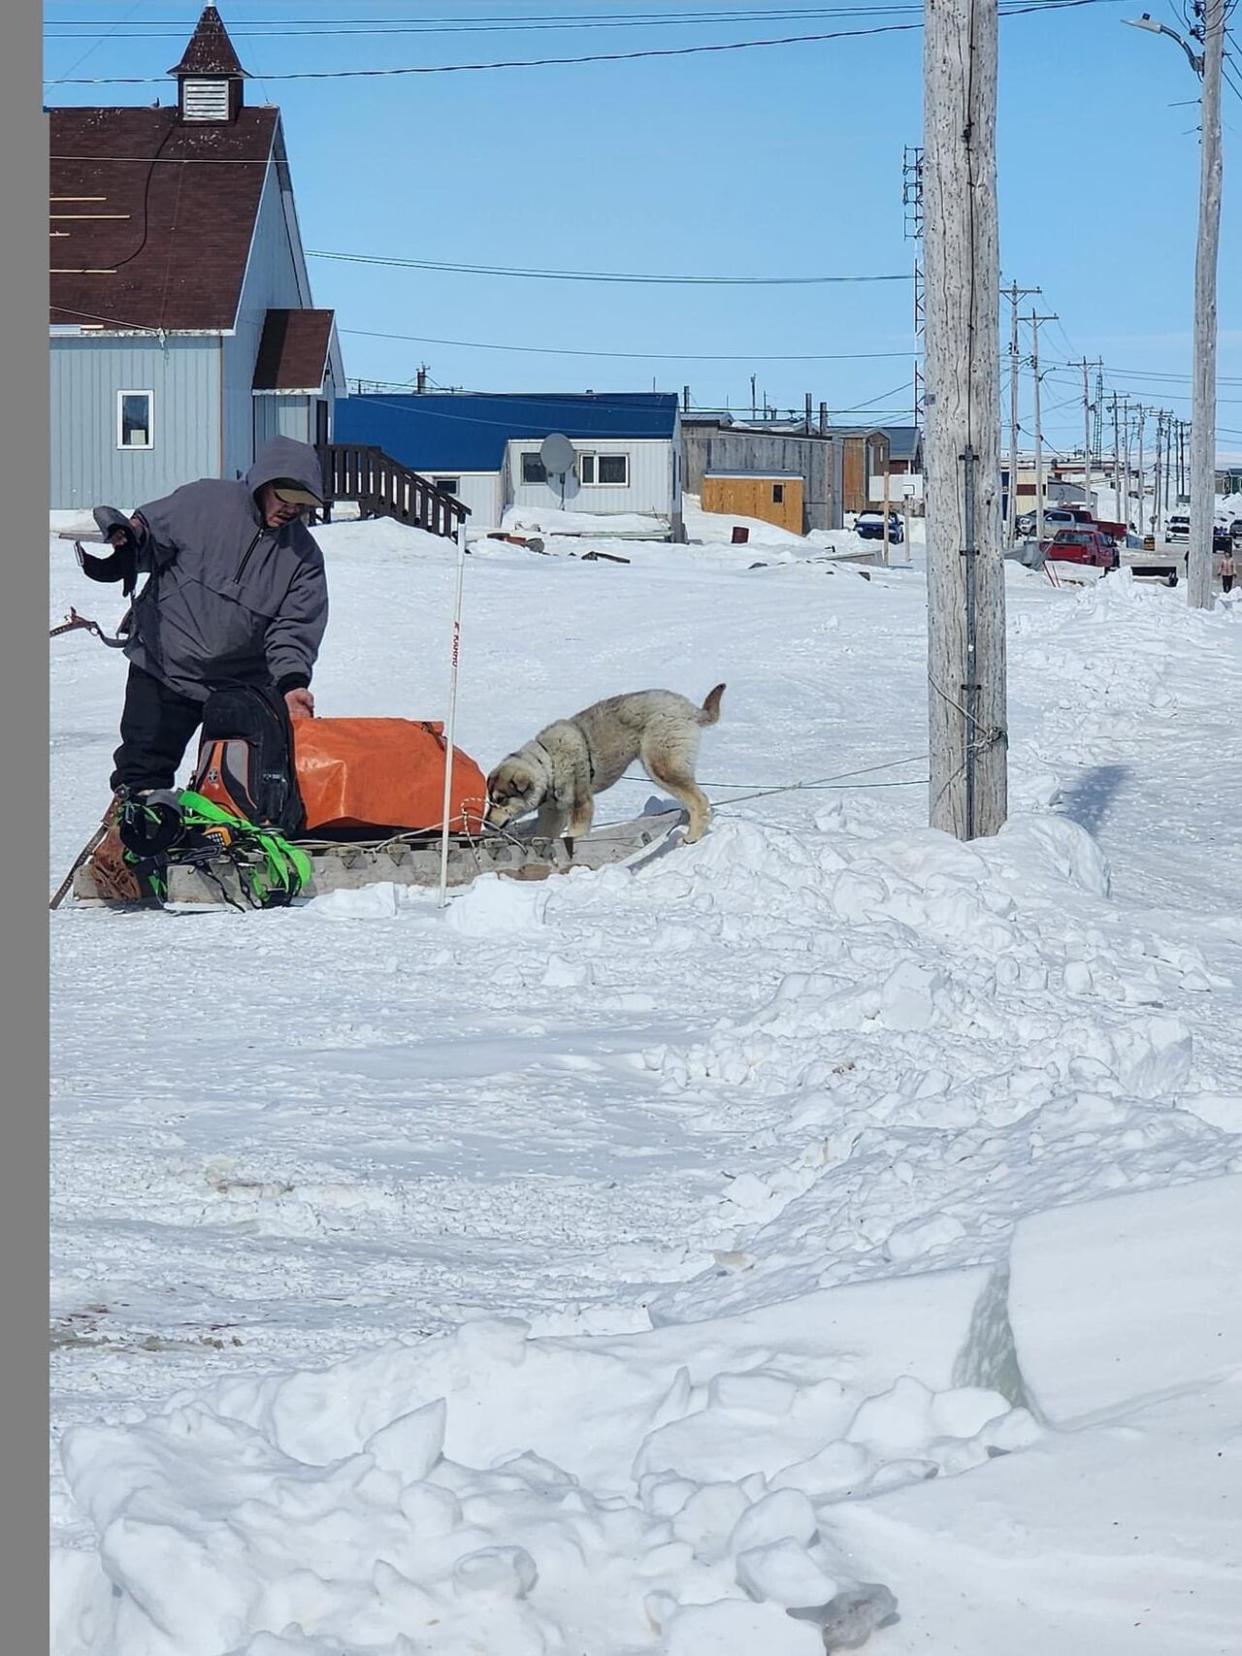 John Pudlat fixes Northwestel's phone lines in Coral Harbour, Nunavut, using his dog and a sled to transport his equipment around town.  (Submitted by John Pudlat  - image credit)